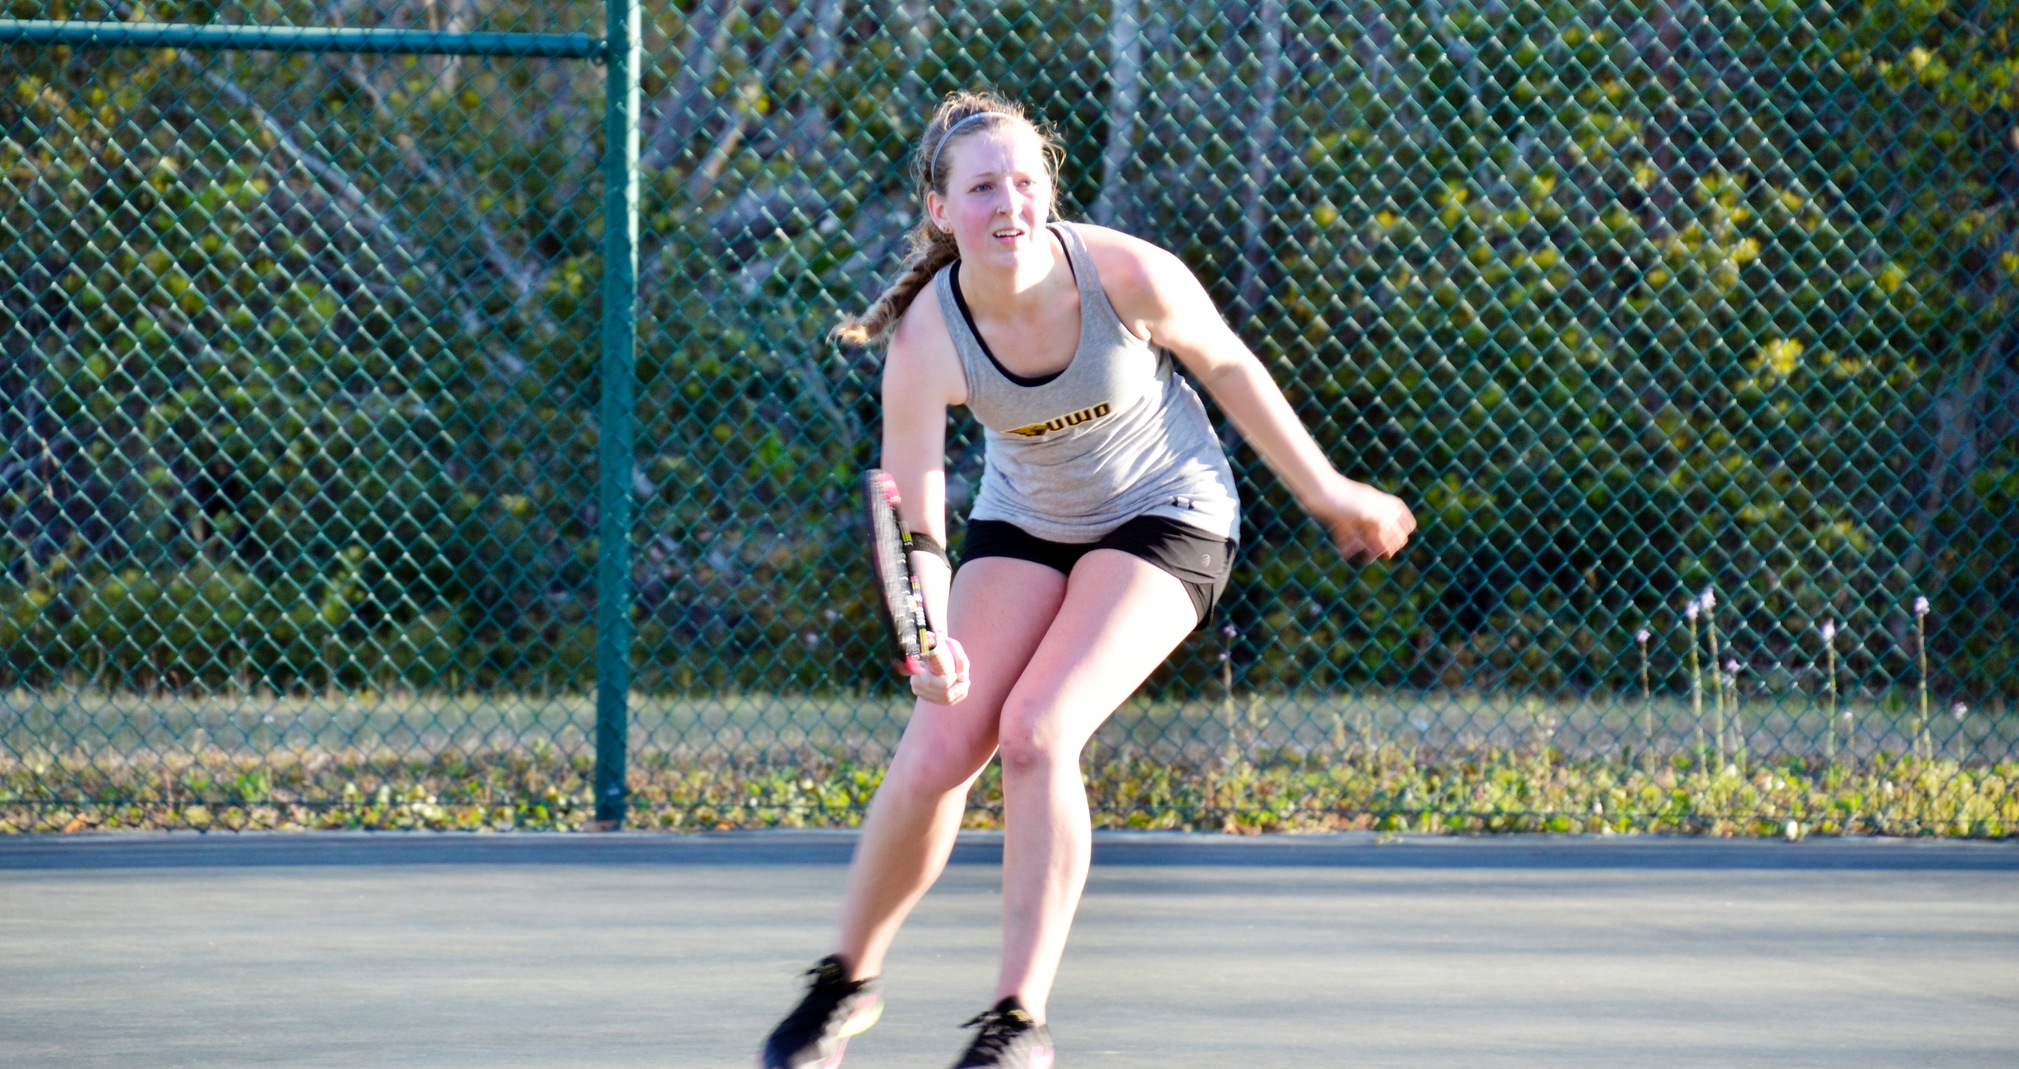 Bailey Sagen competed against the Dutchmen and Tommies at both No. 1 singles and No. 1 doubles.